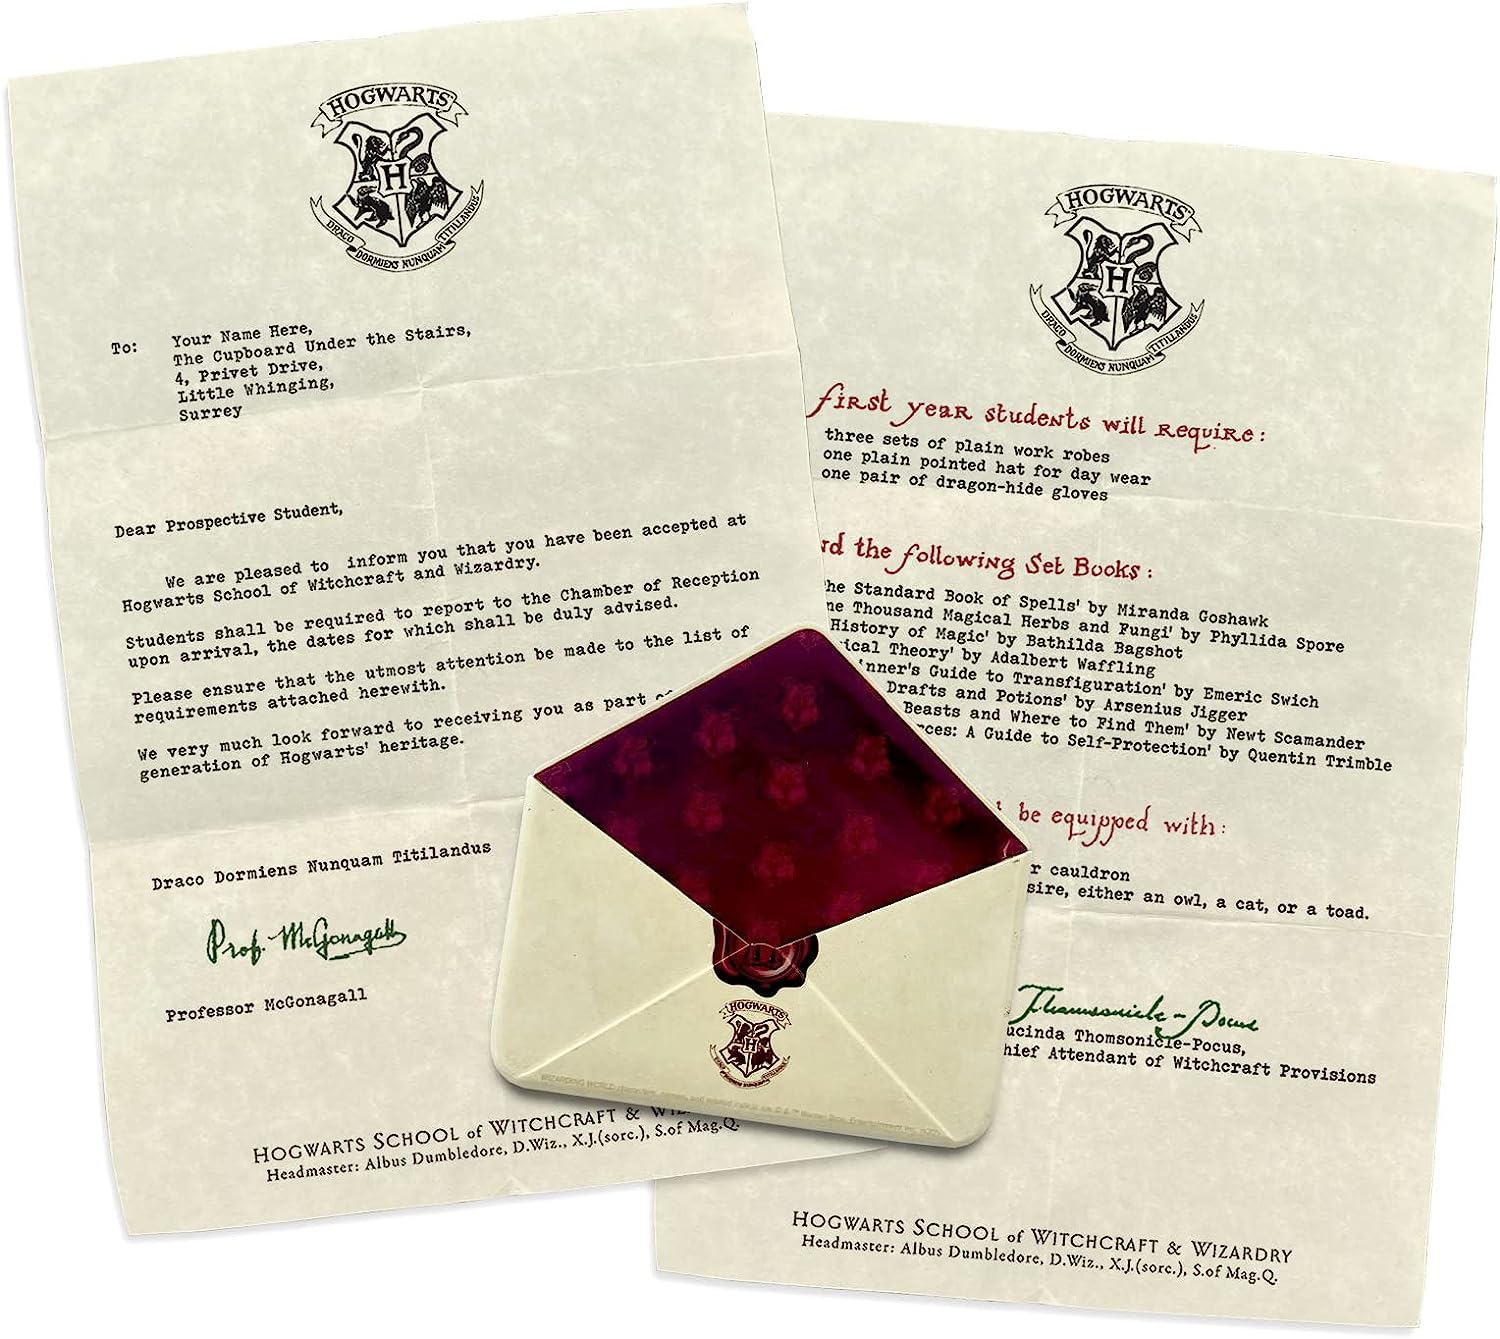 Harry Potter – Personalized Hogwarts Acceptance Letter – 3.5” x 3.5” Functional Resin Envelope Magnet with 5” x 8” Letter from Professor McGonagall | Officially Licensed Merchandise